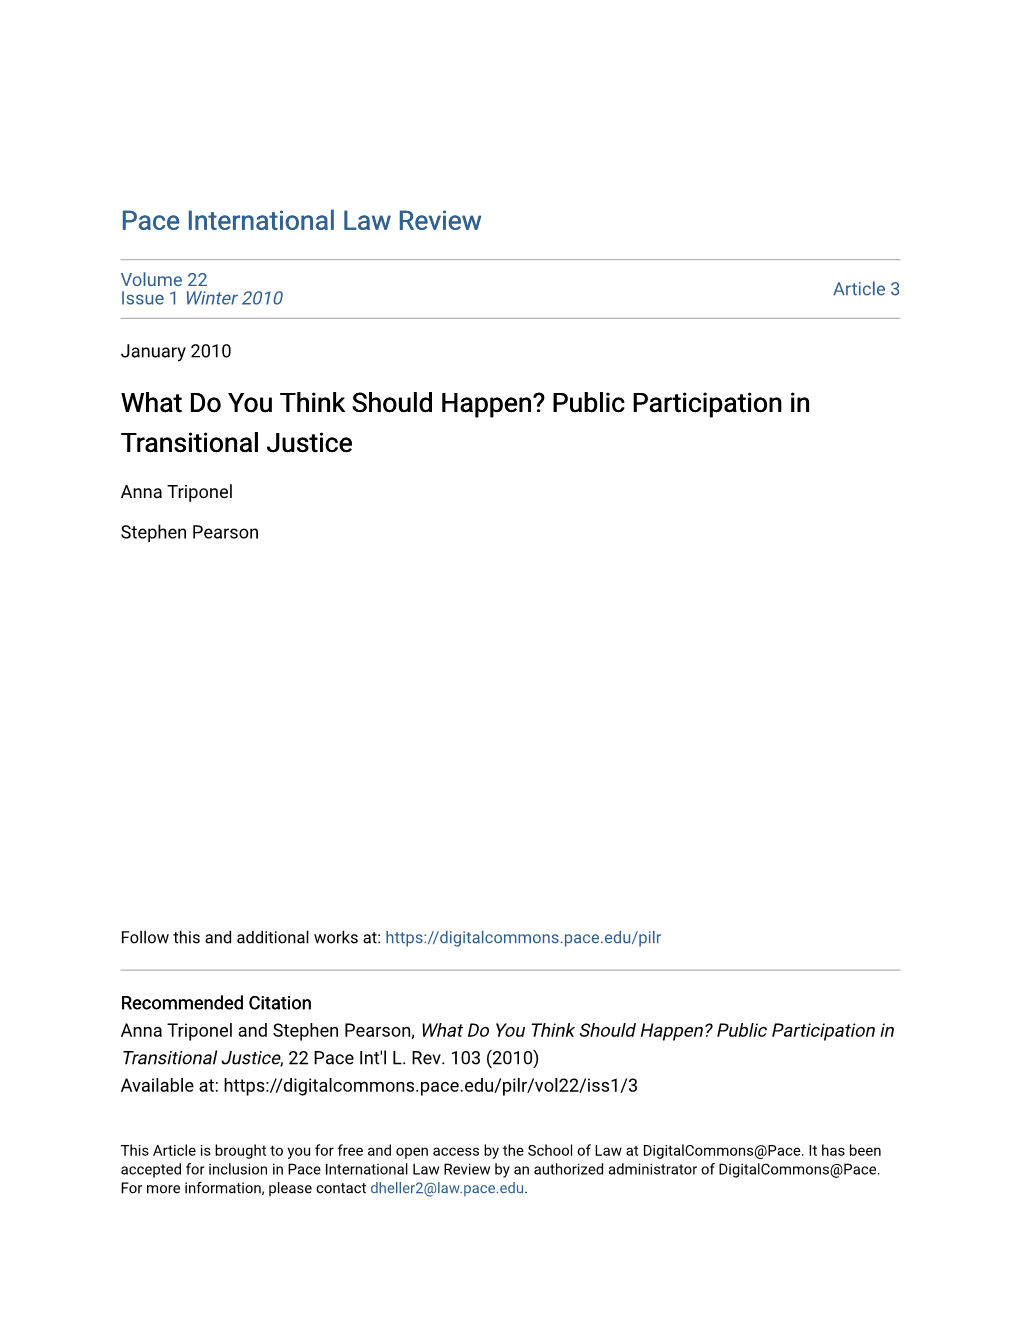 Public Participation in Transitional Justice